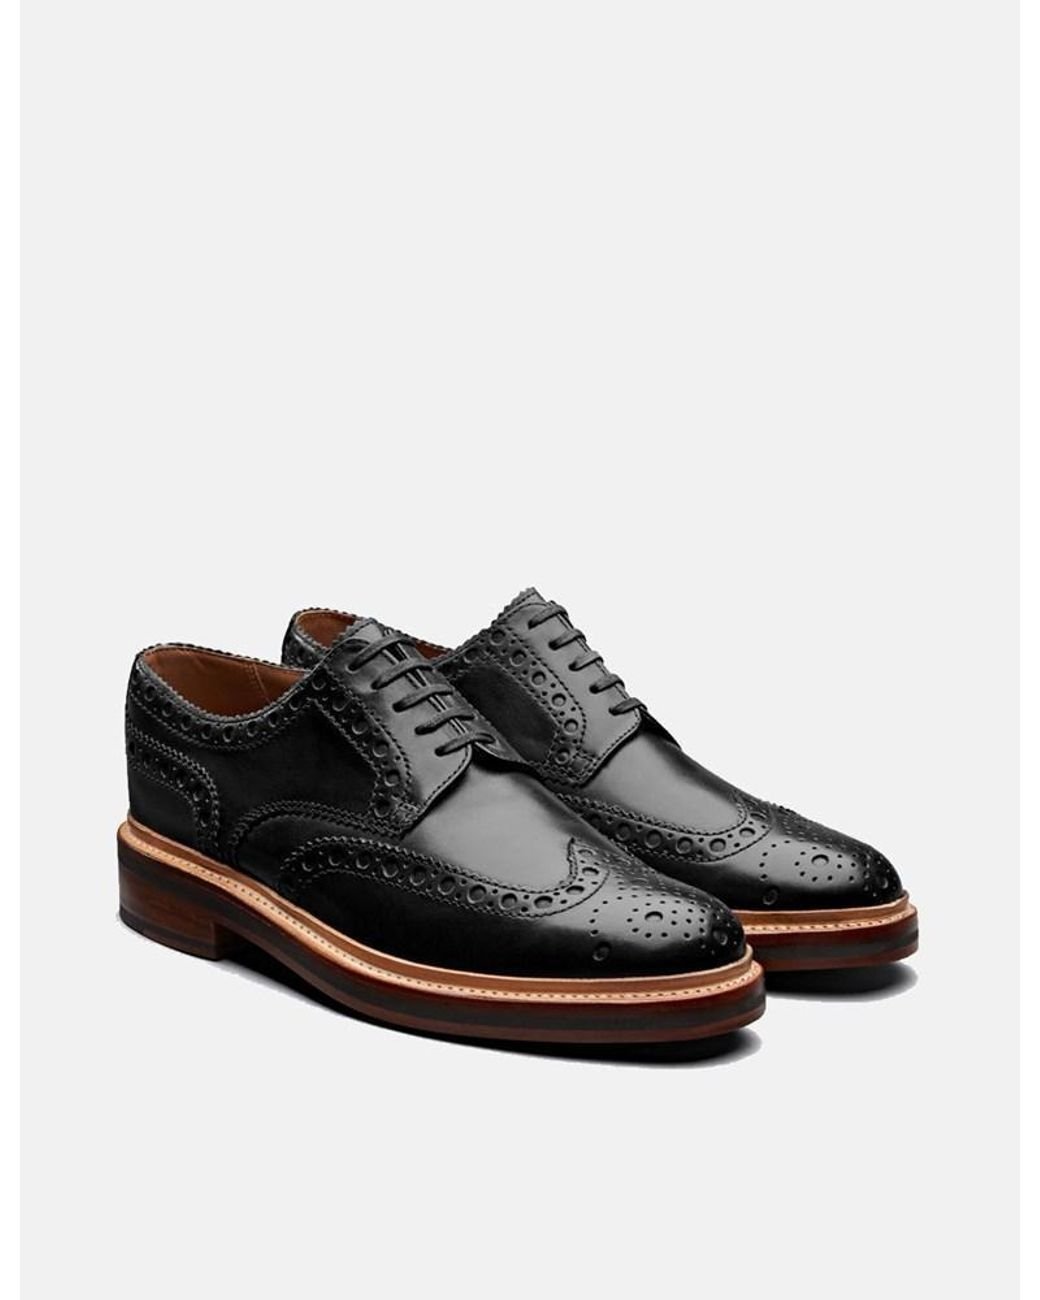 Grenson Archie Brogue Shoes (calf Leather) in Black for Men - Save 28% ...